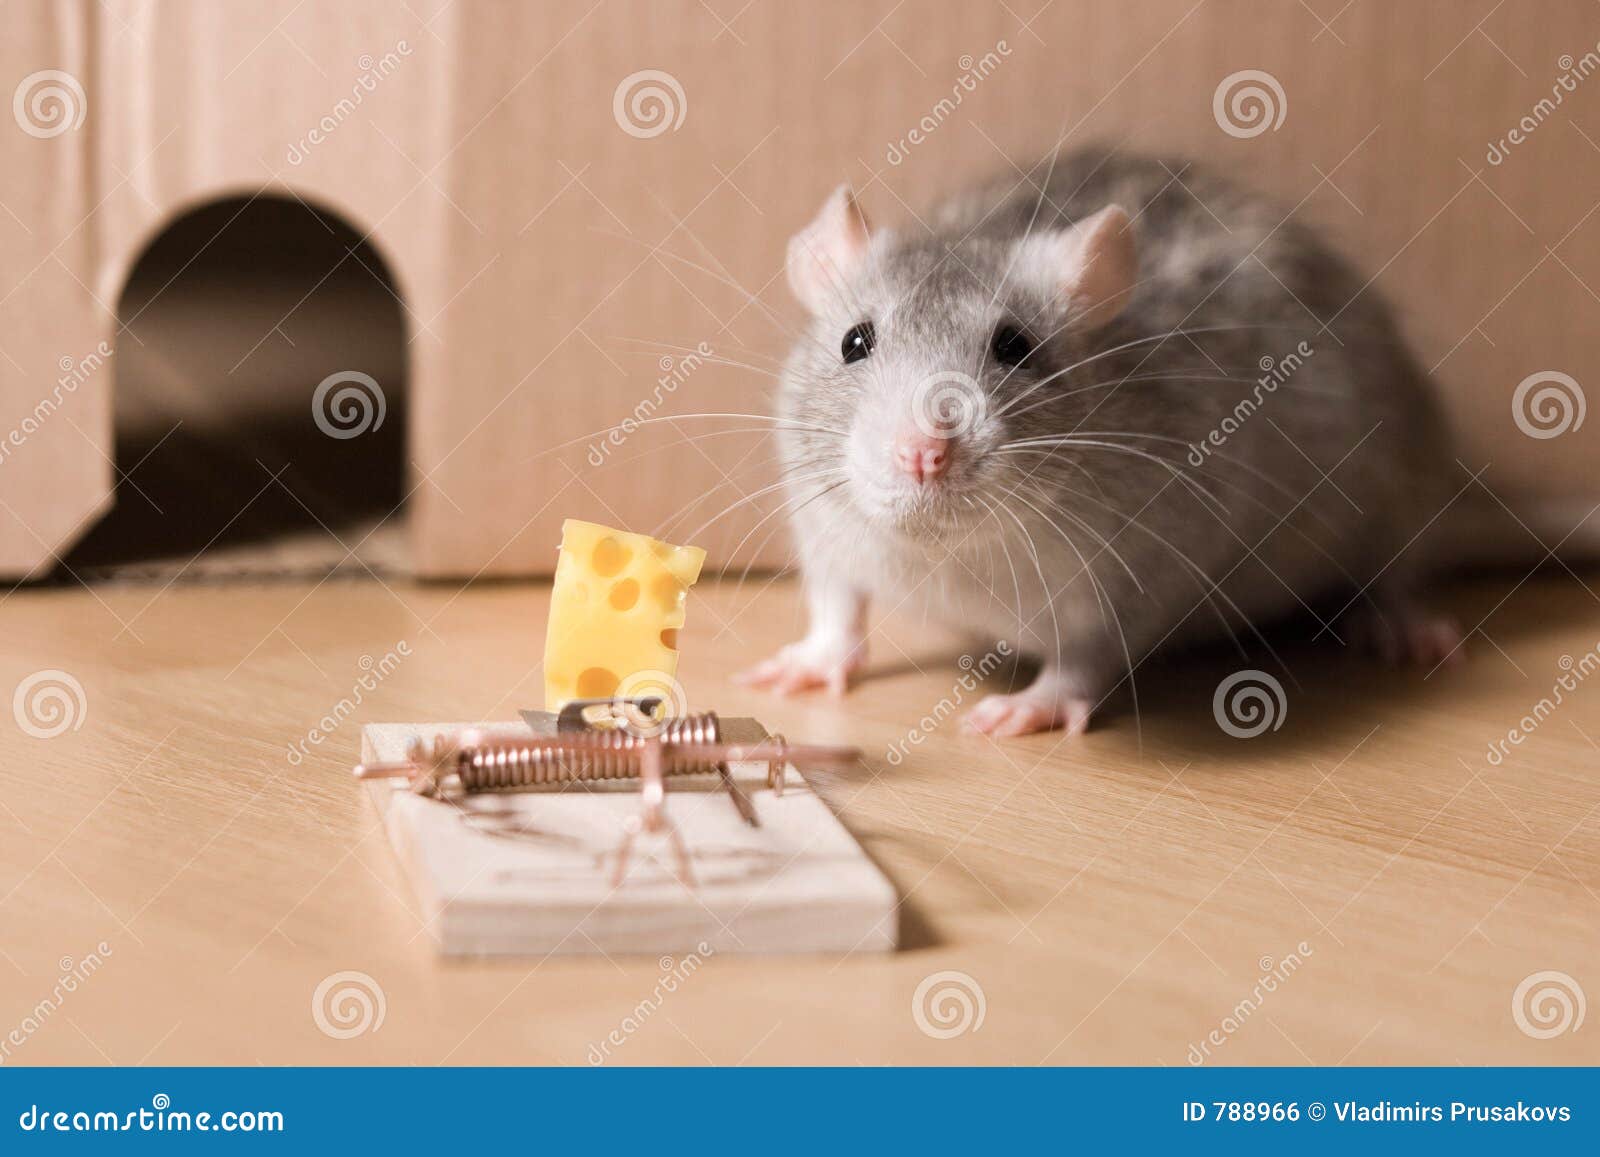 https://thumbs.dreamstime.com/z/mousetrap-cheese-788966.jpg